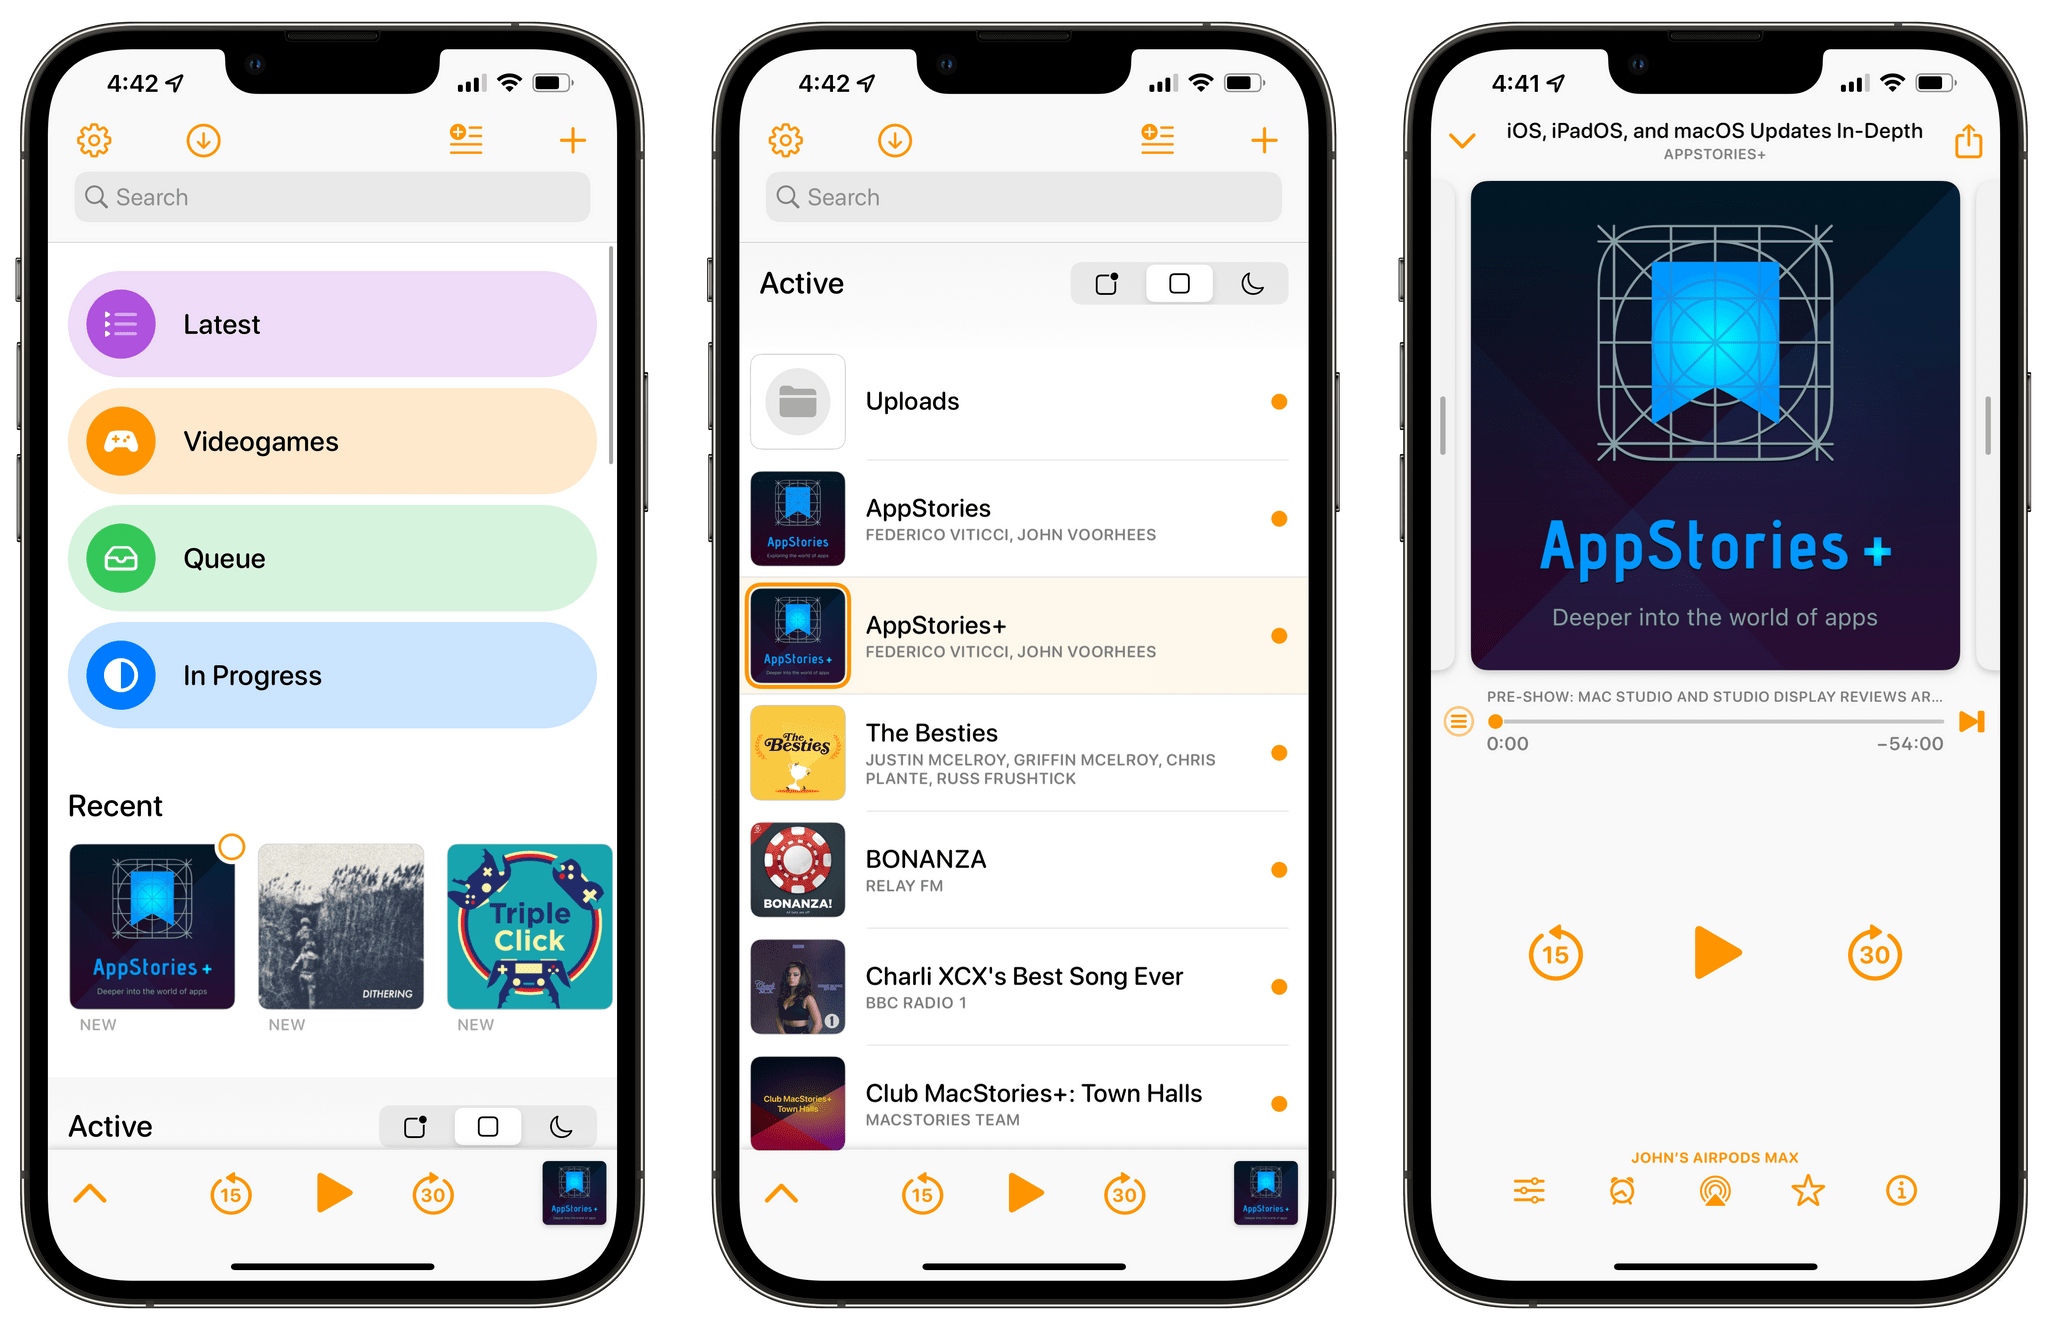 Overcast's main screen is divided into three sections: Playlists, Recent, and a Unplayed/Active/Inactive list.